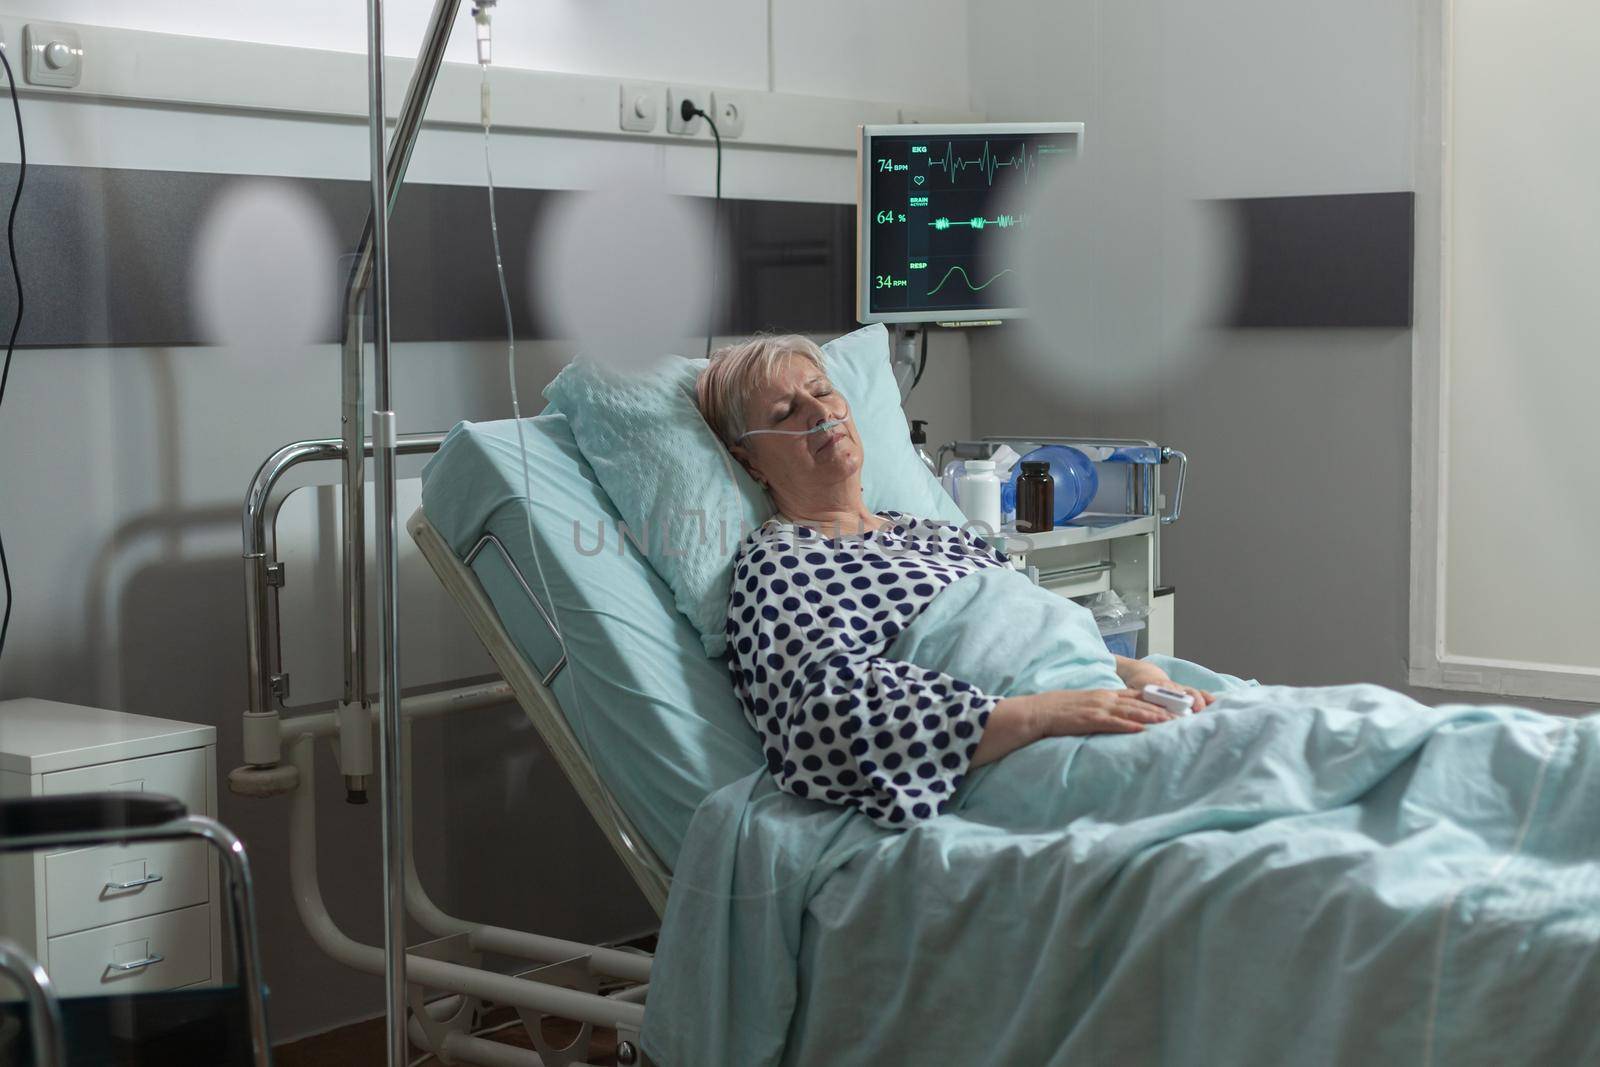 Senior woman patient in hospital room getting medicine through intravenous line from iv drip bag and breathing with help from oxygen mask laying in bed. Oxymeter attached on finger monitoring bpm.